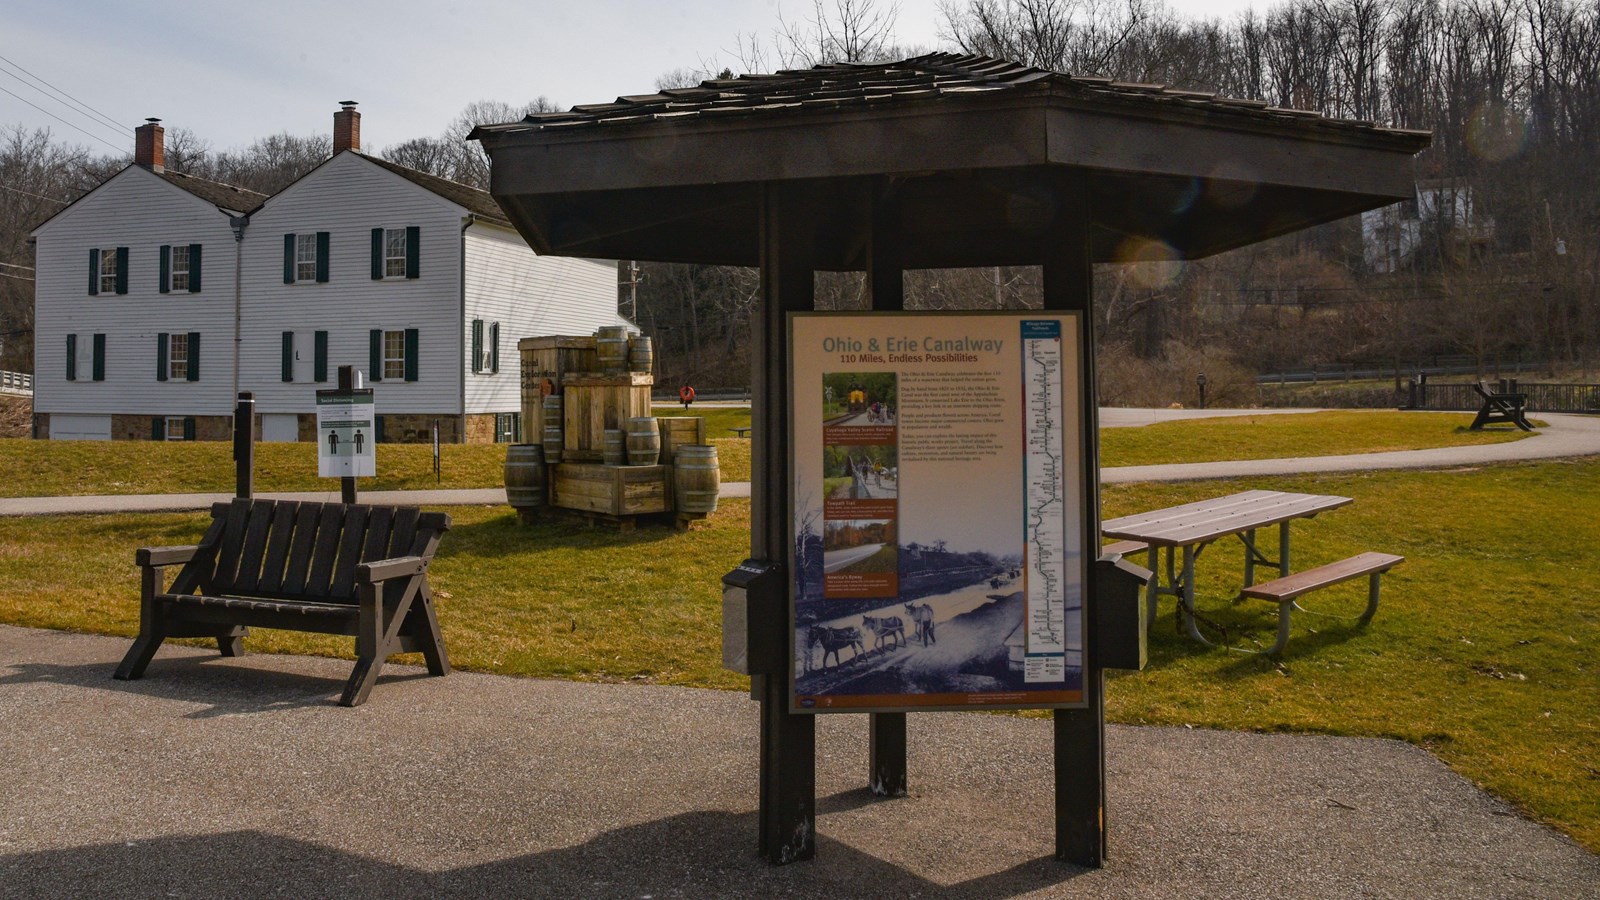 3-sided kiosk by a picnic table and benches. Path leads to a two-story white building behind.